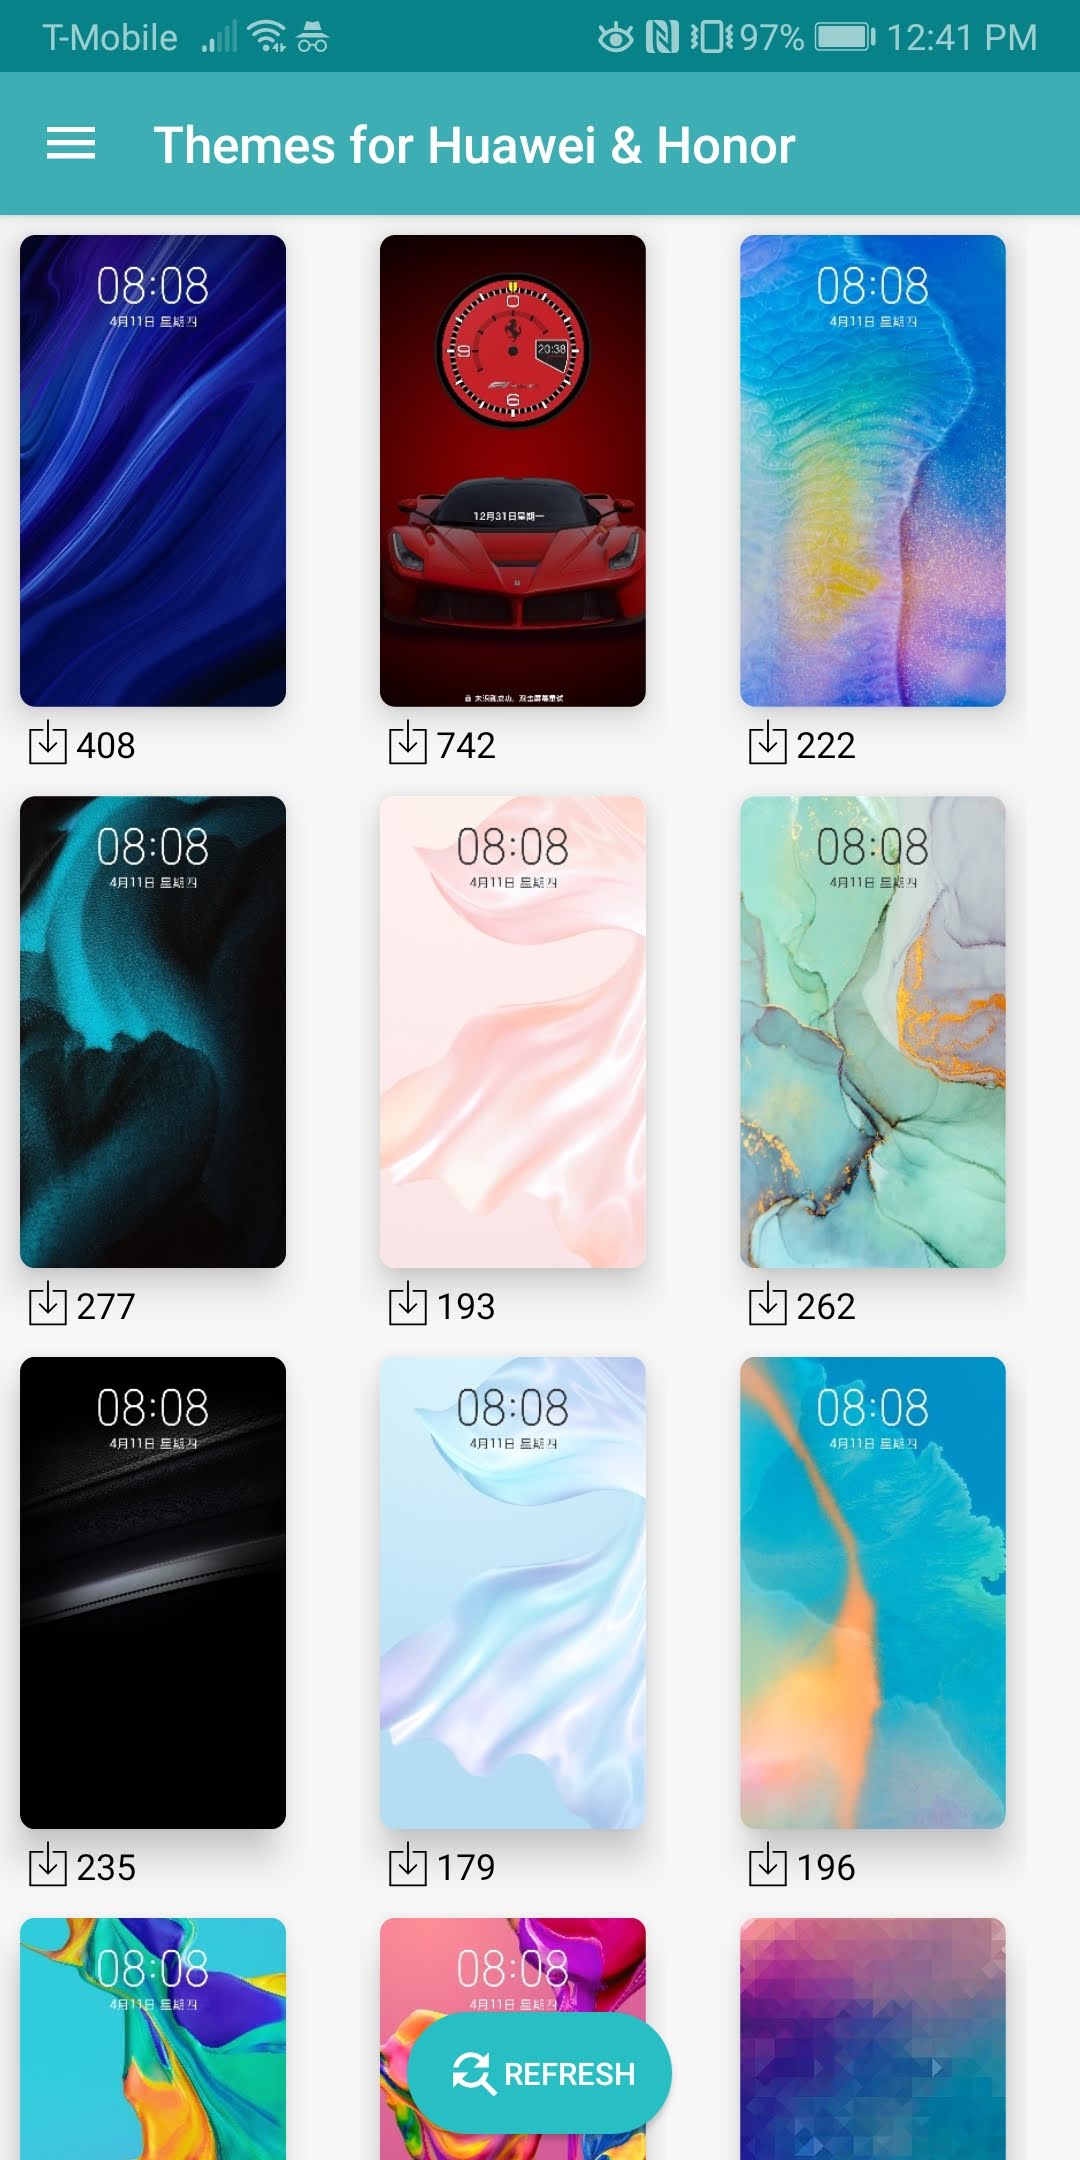 themes for huawei and honor app screenshot 1